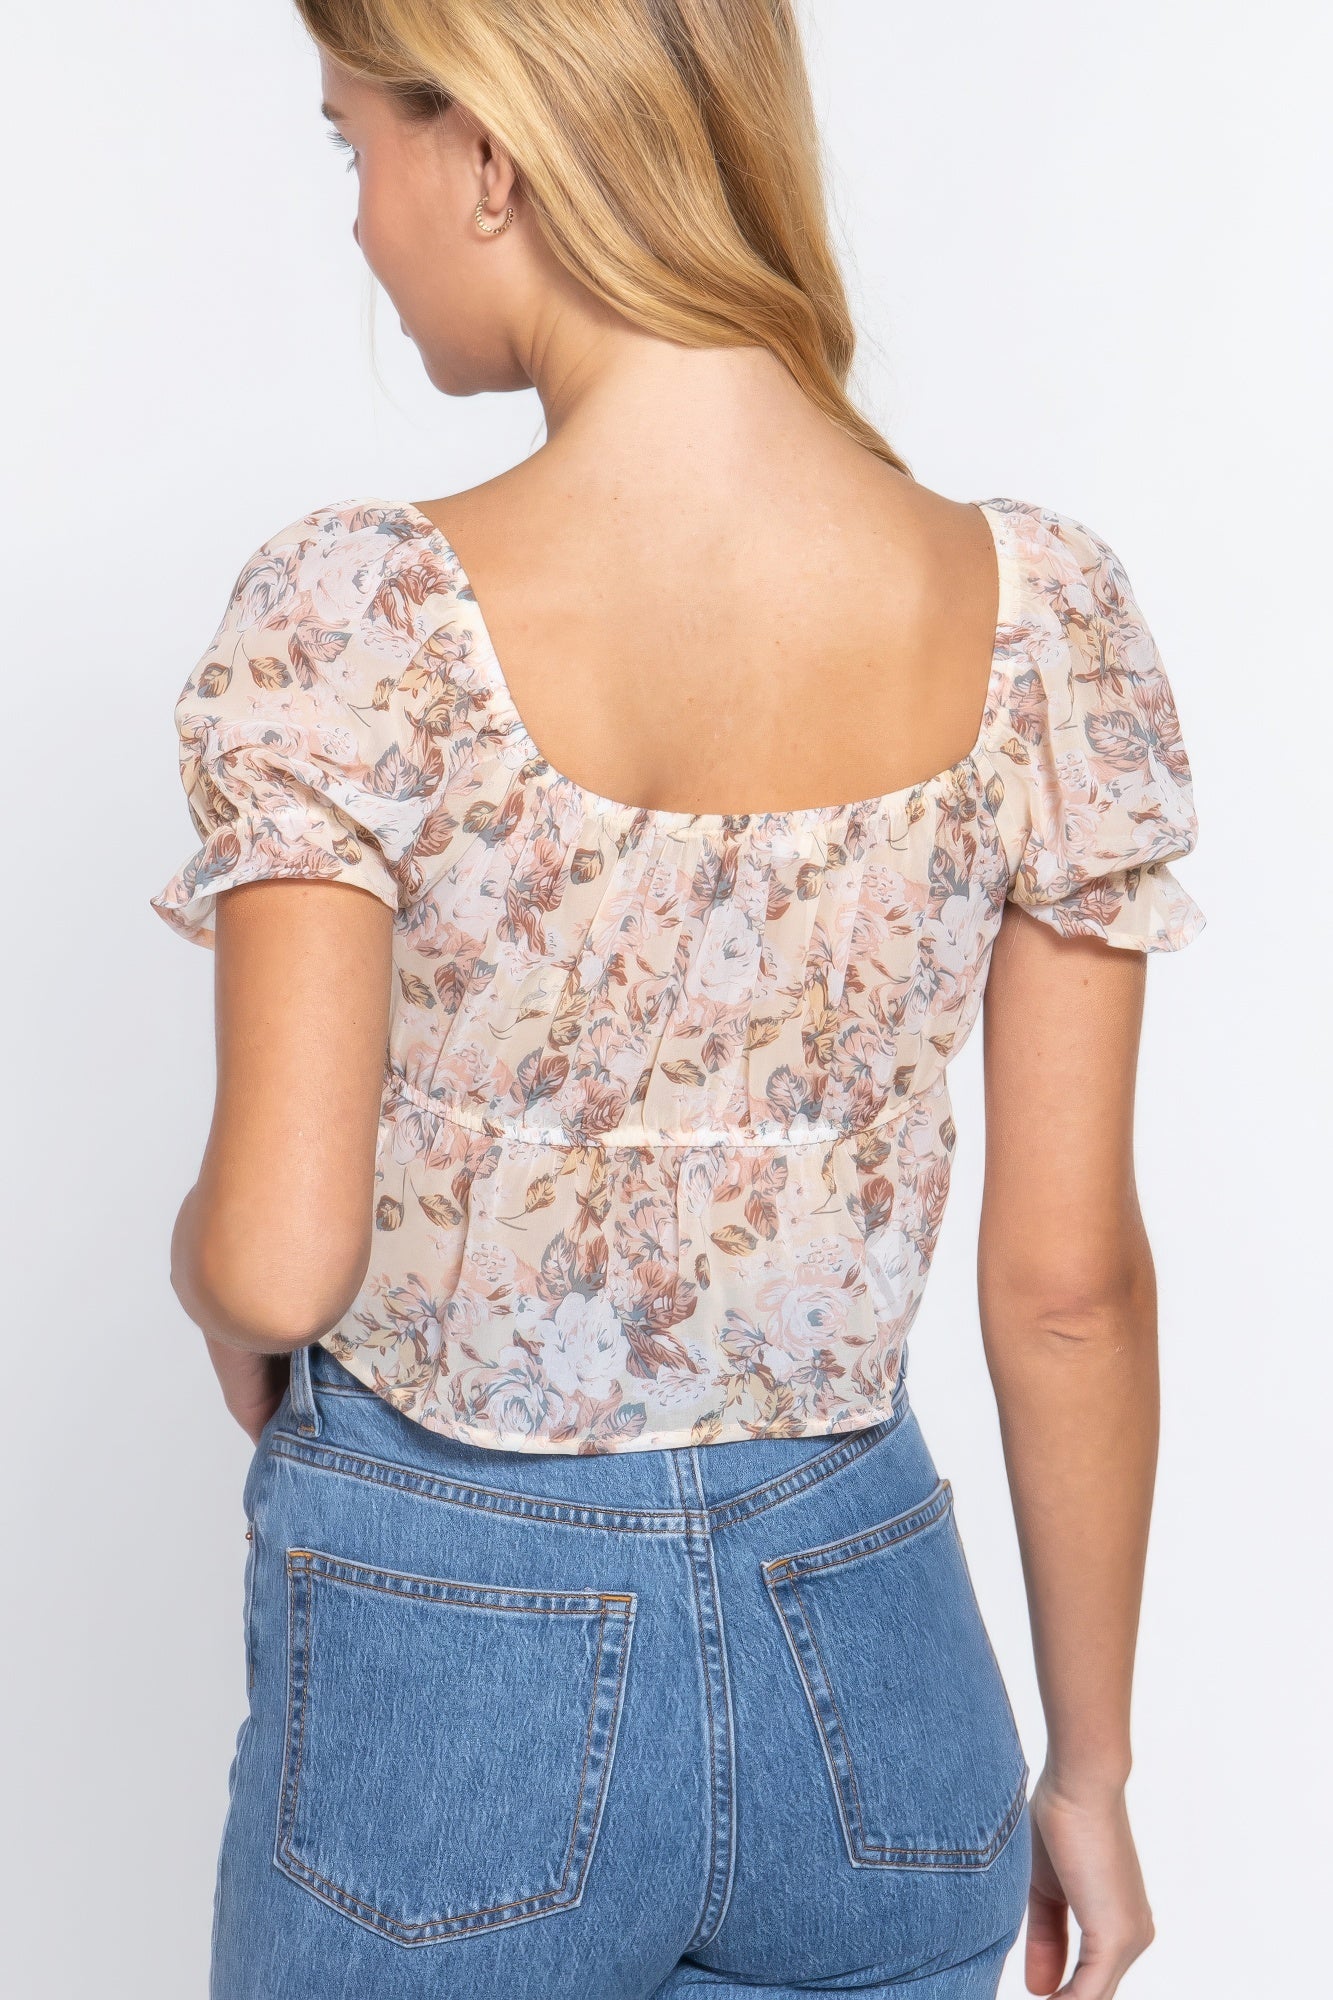 THE CAYLA Short Slv Front Tie Print Woven Top